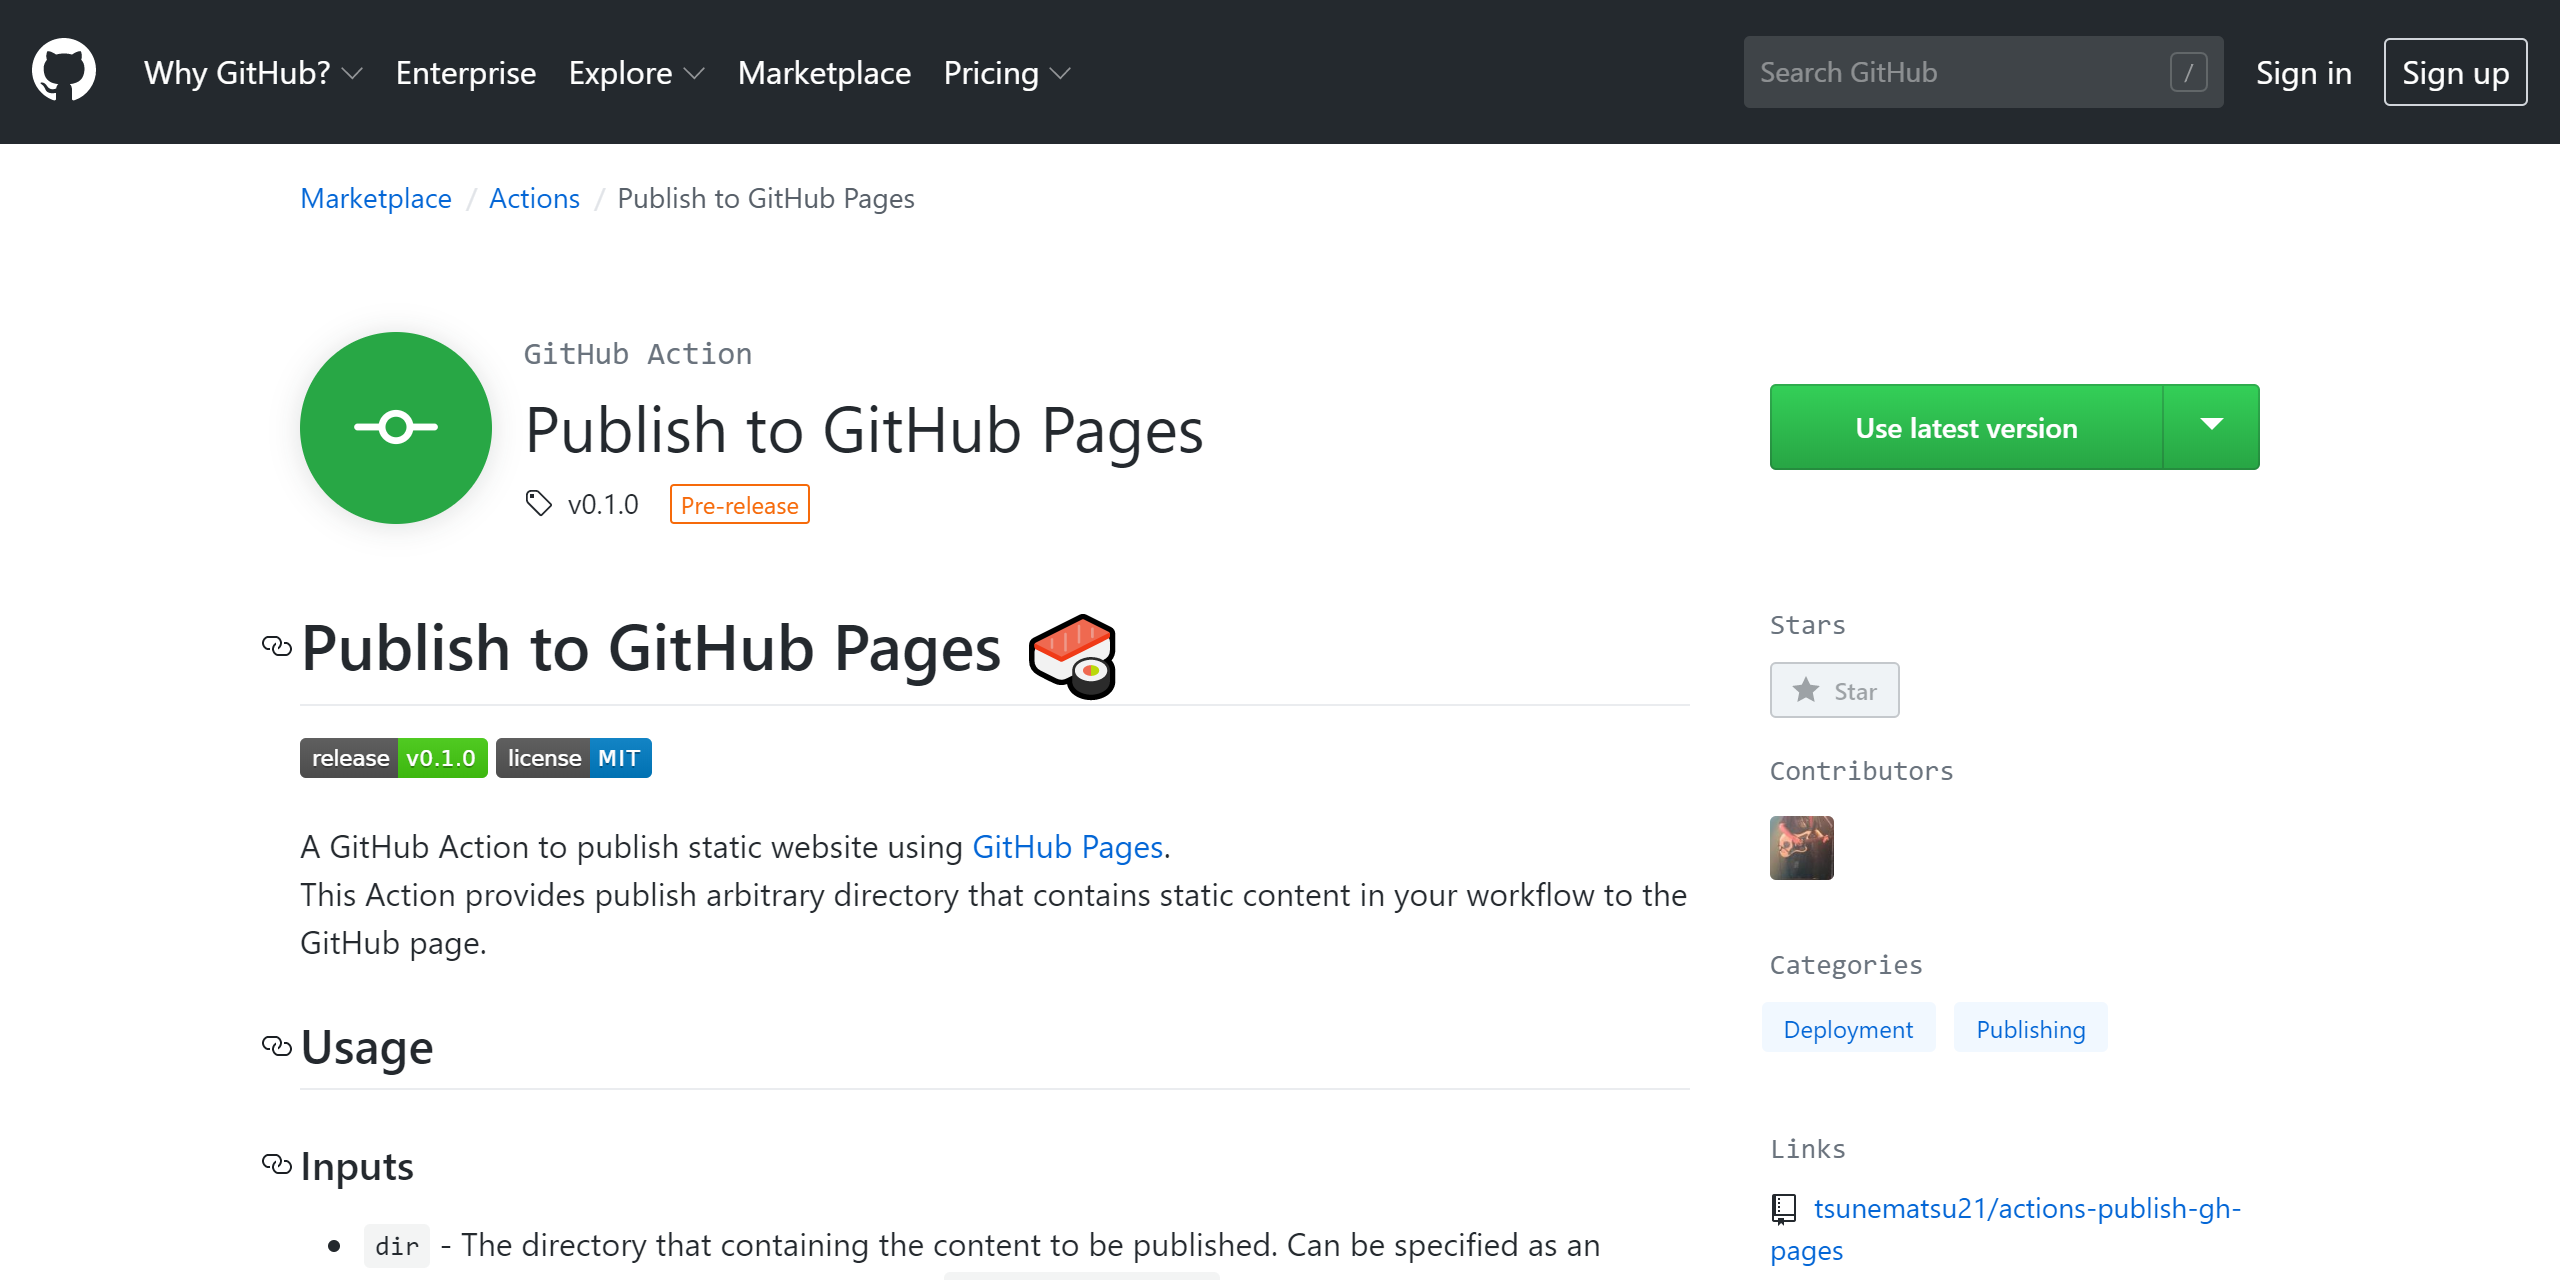 GitHub Action: Integrated CI/CD Platform for the Entire Software Development Lifecycle